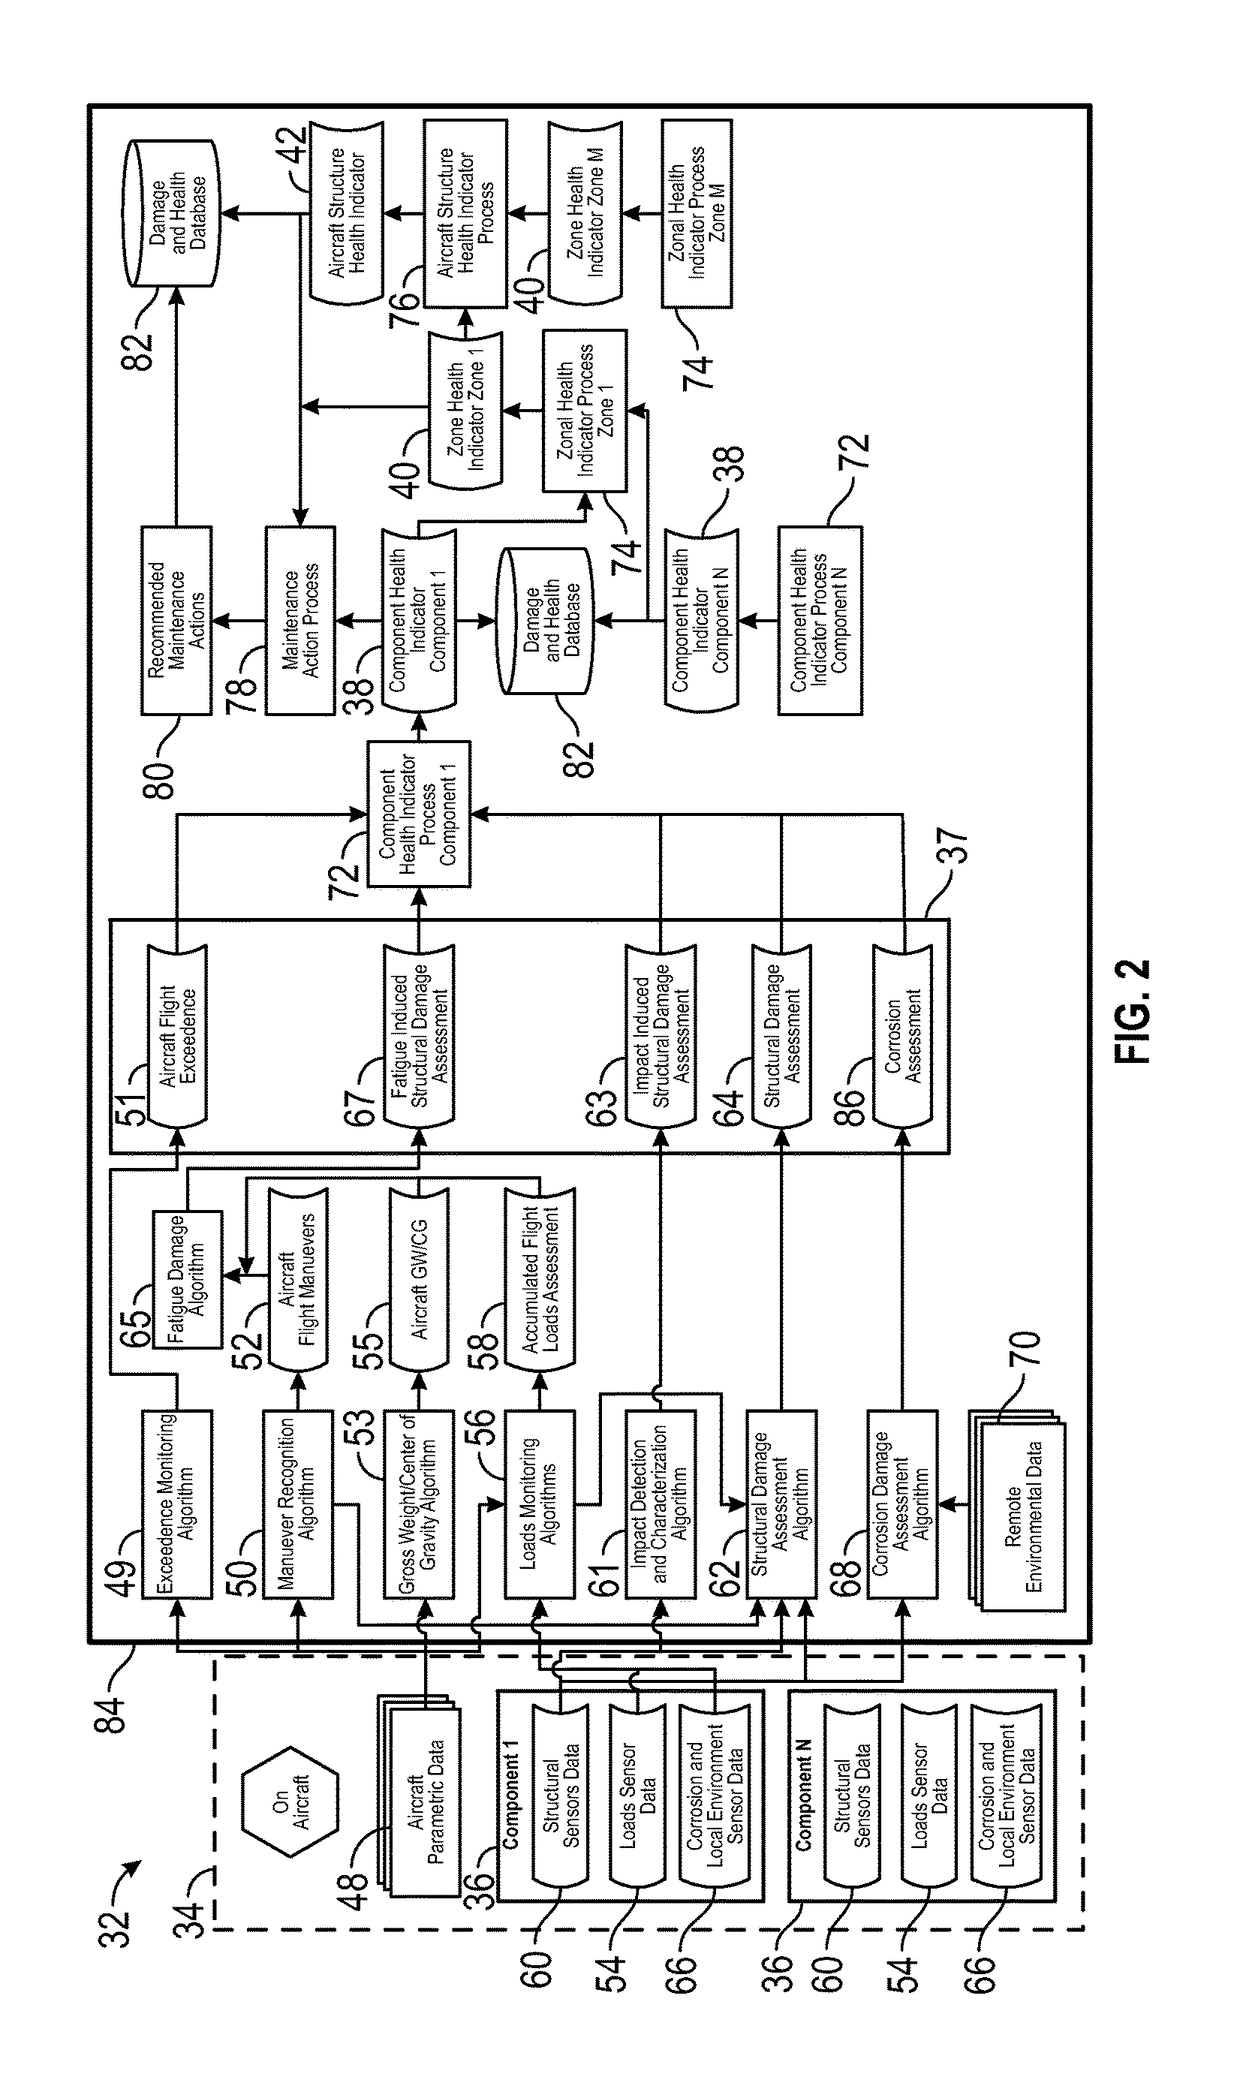 System and method for health assessment of aircraft structure